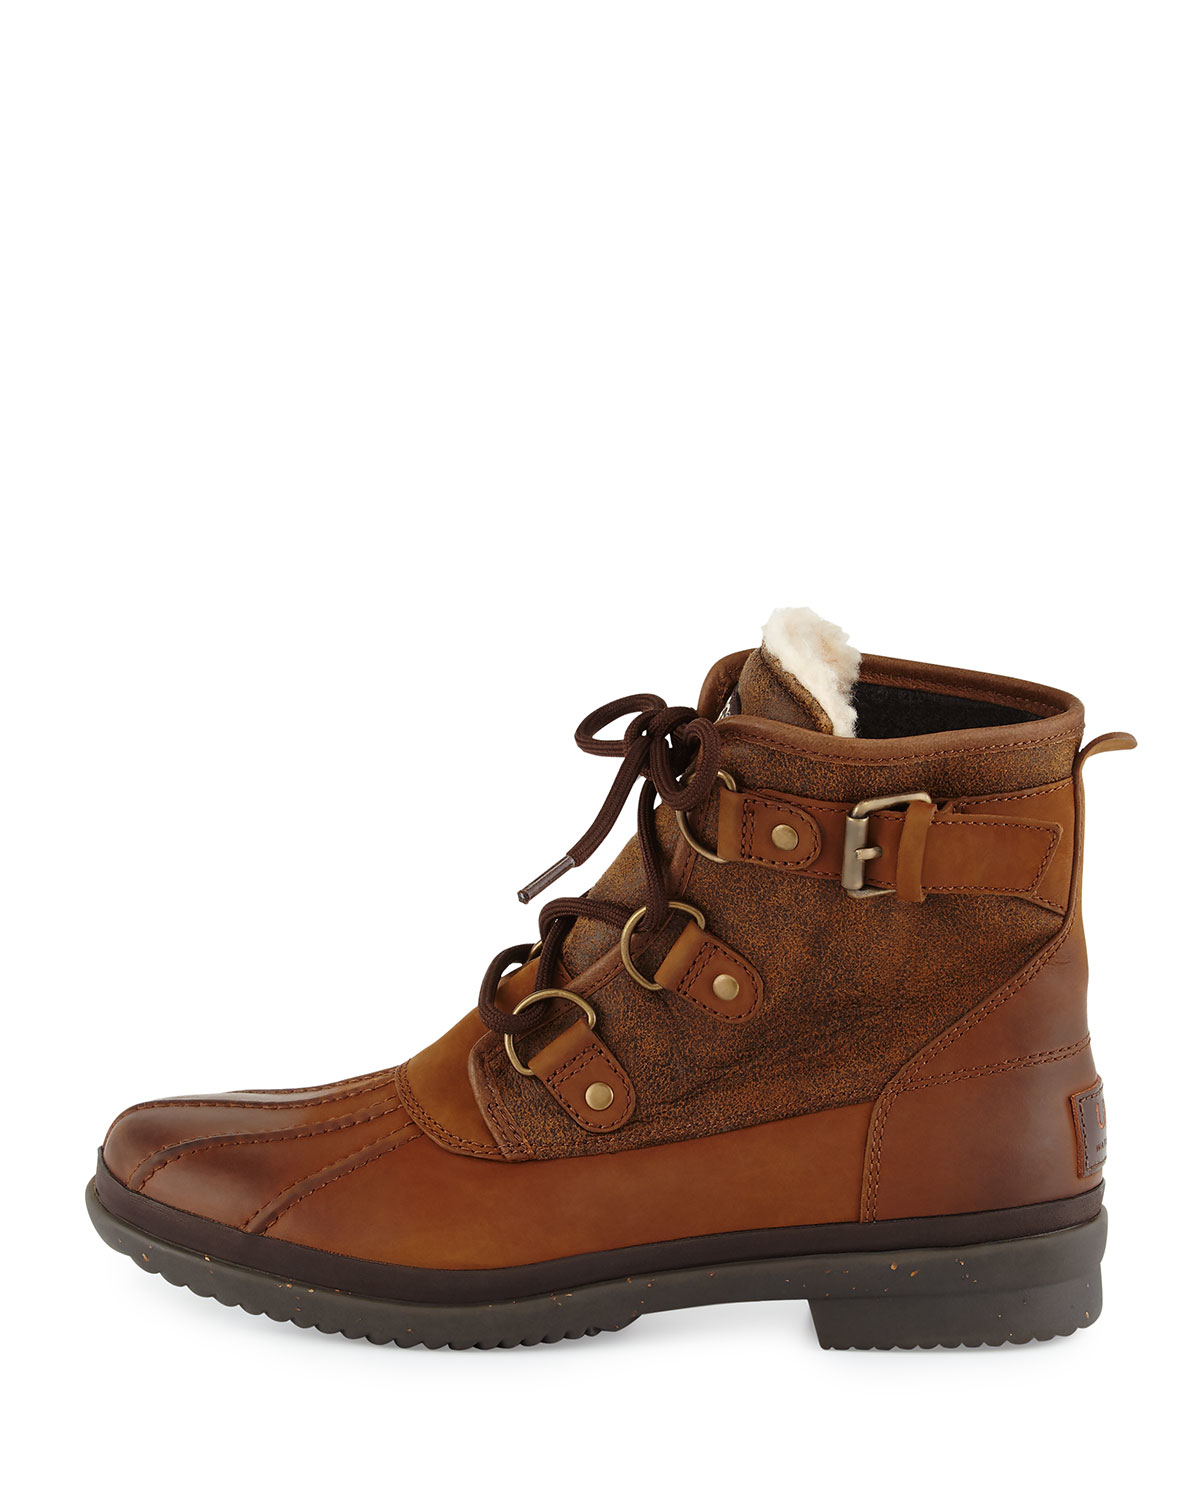 Lyst - Ugg Cecile Lace-up Weather Boot in Brown